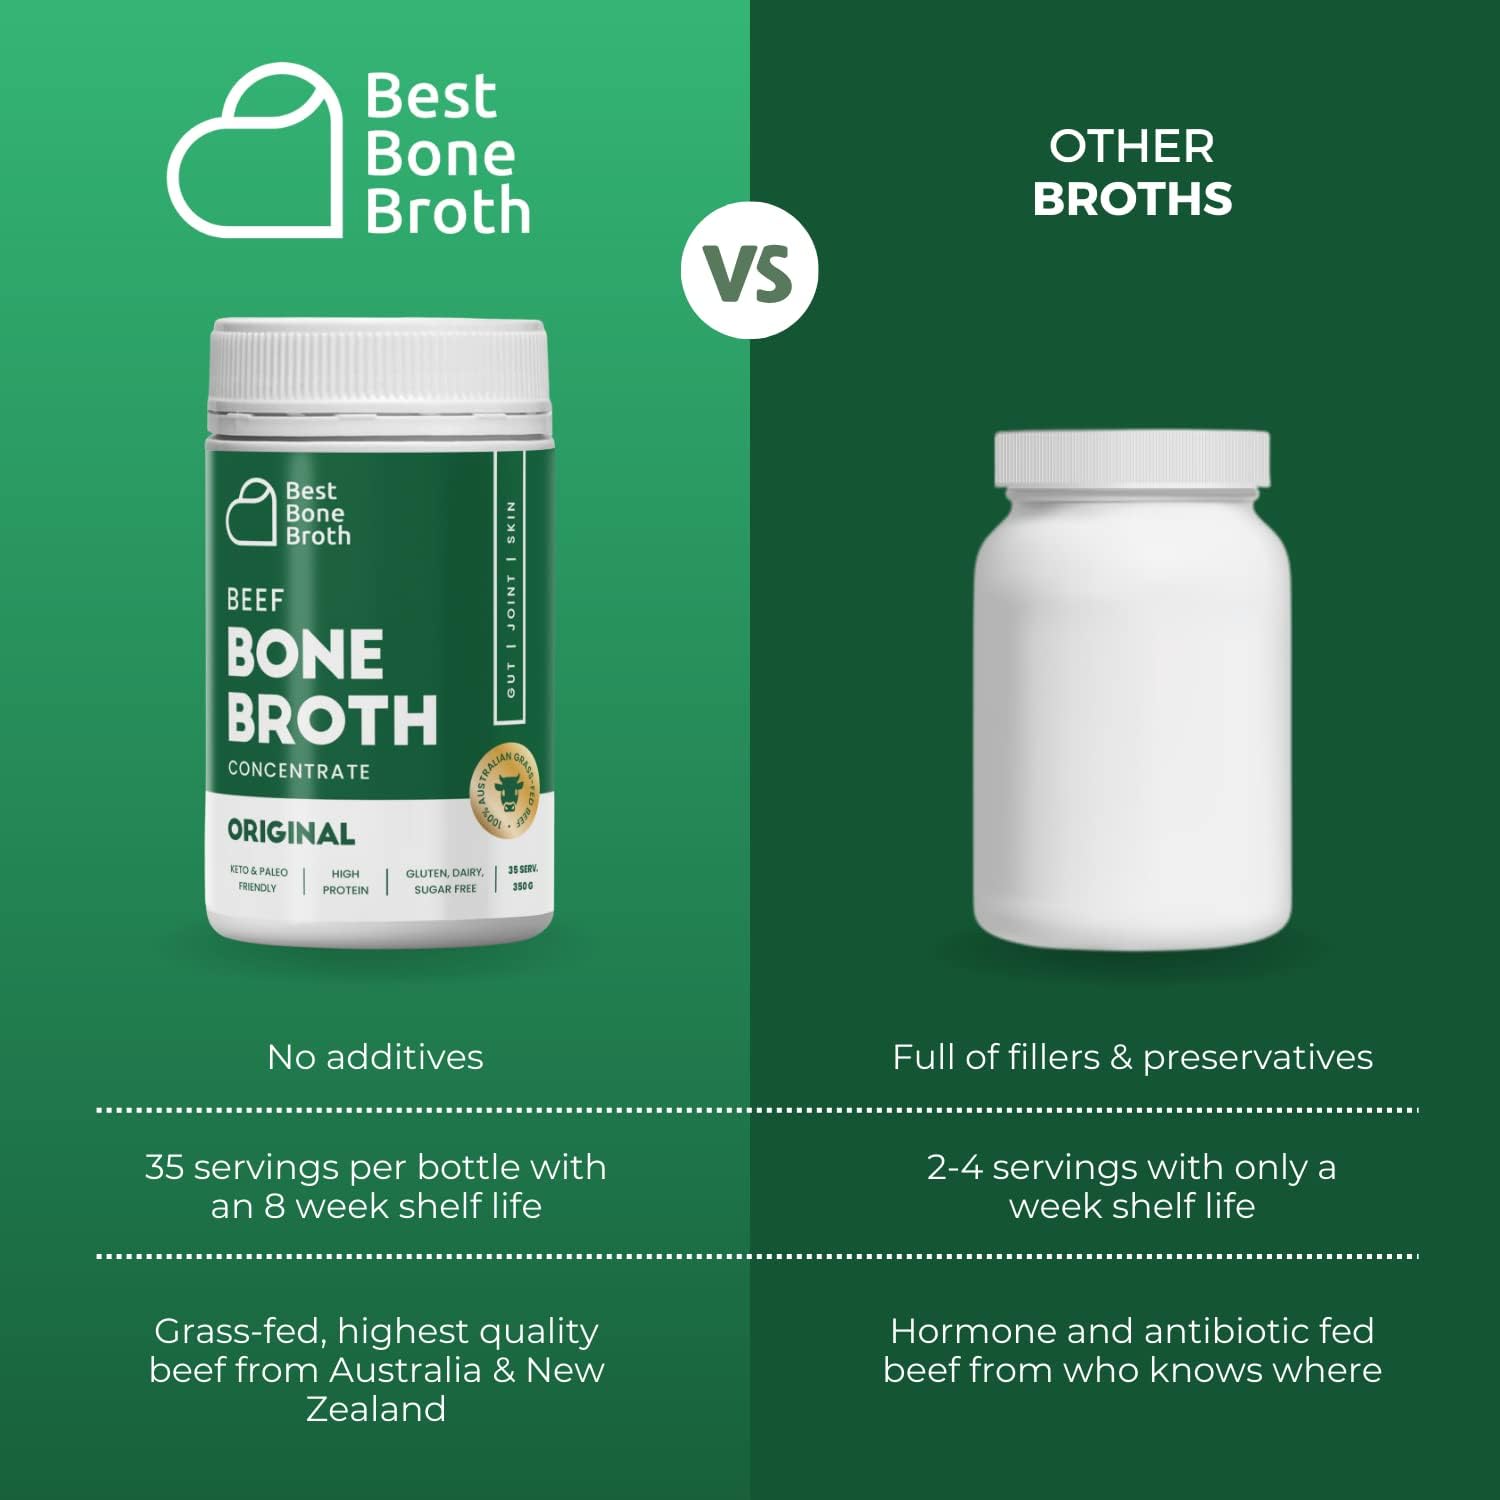 Best Bone Broth - Beef Bone Broth Concentrate - Review Compared to Other Keto Bone Broths